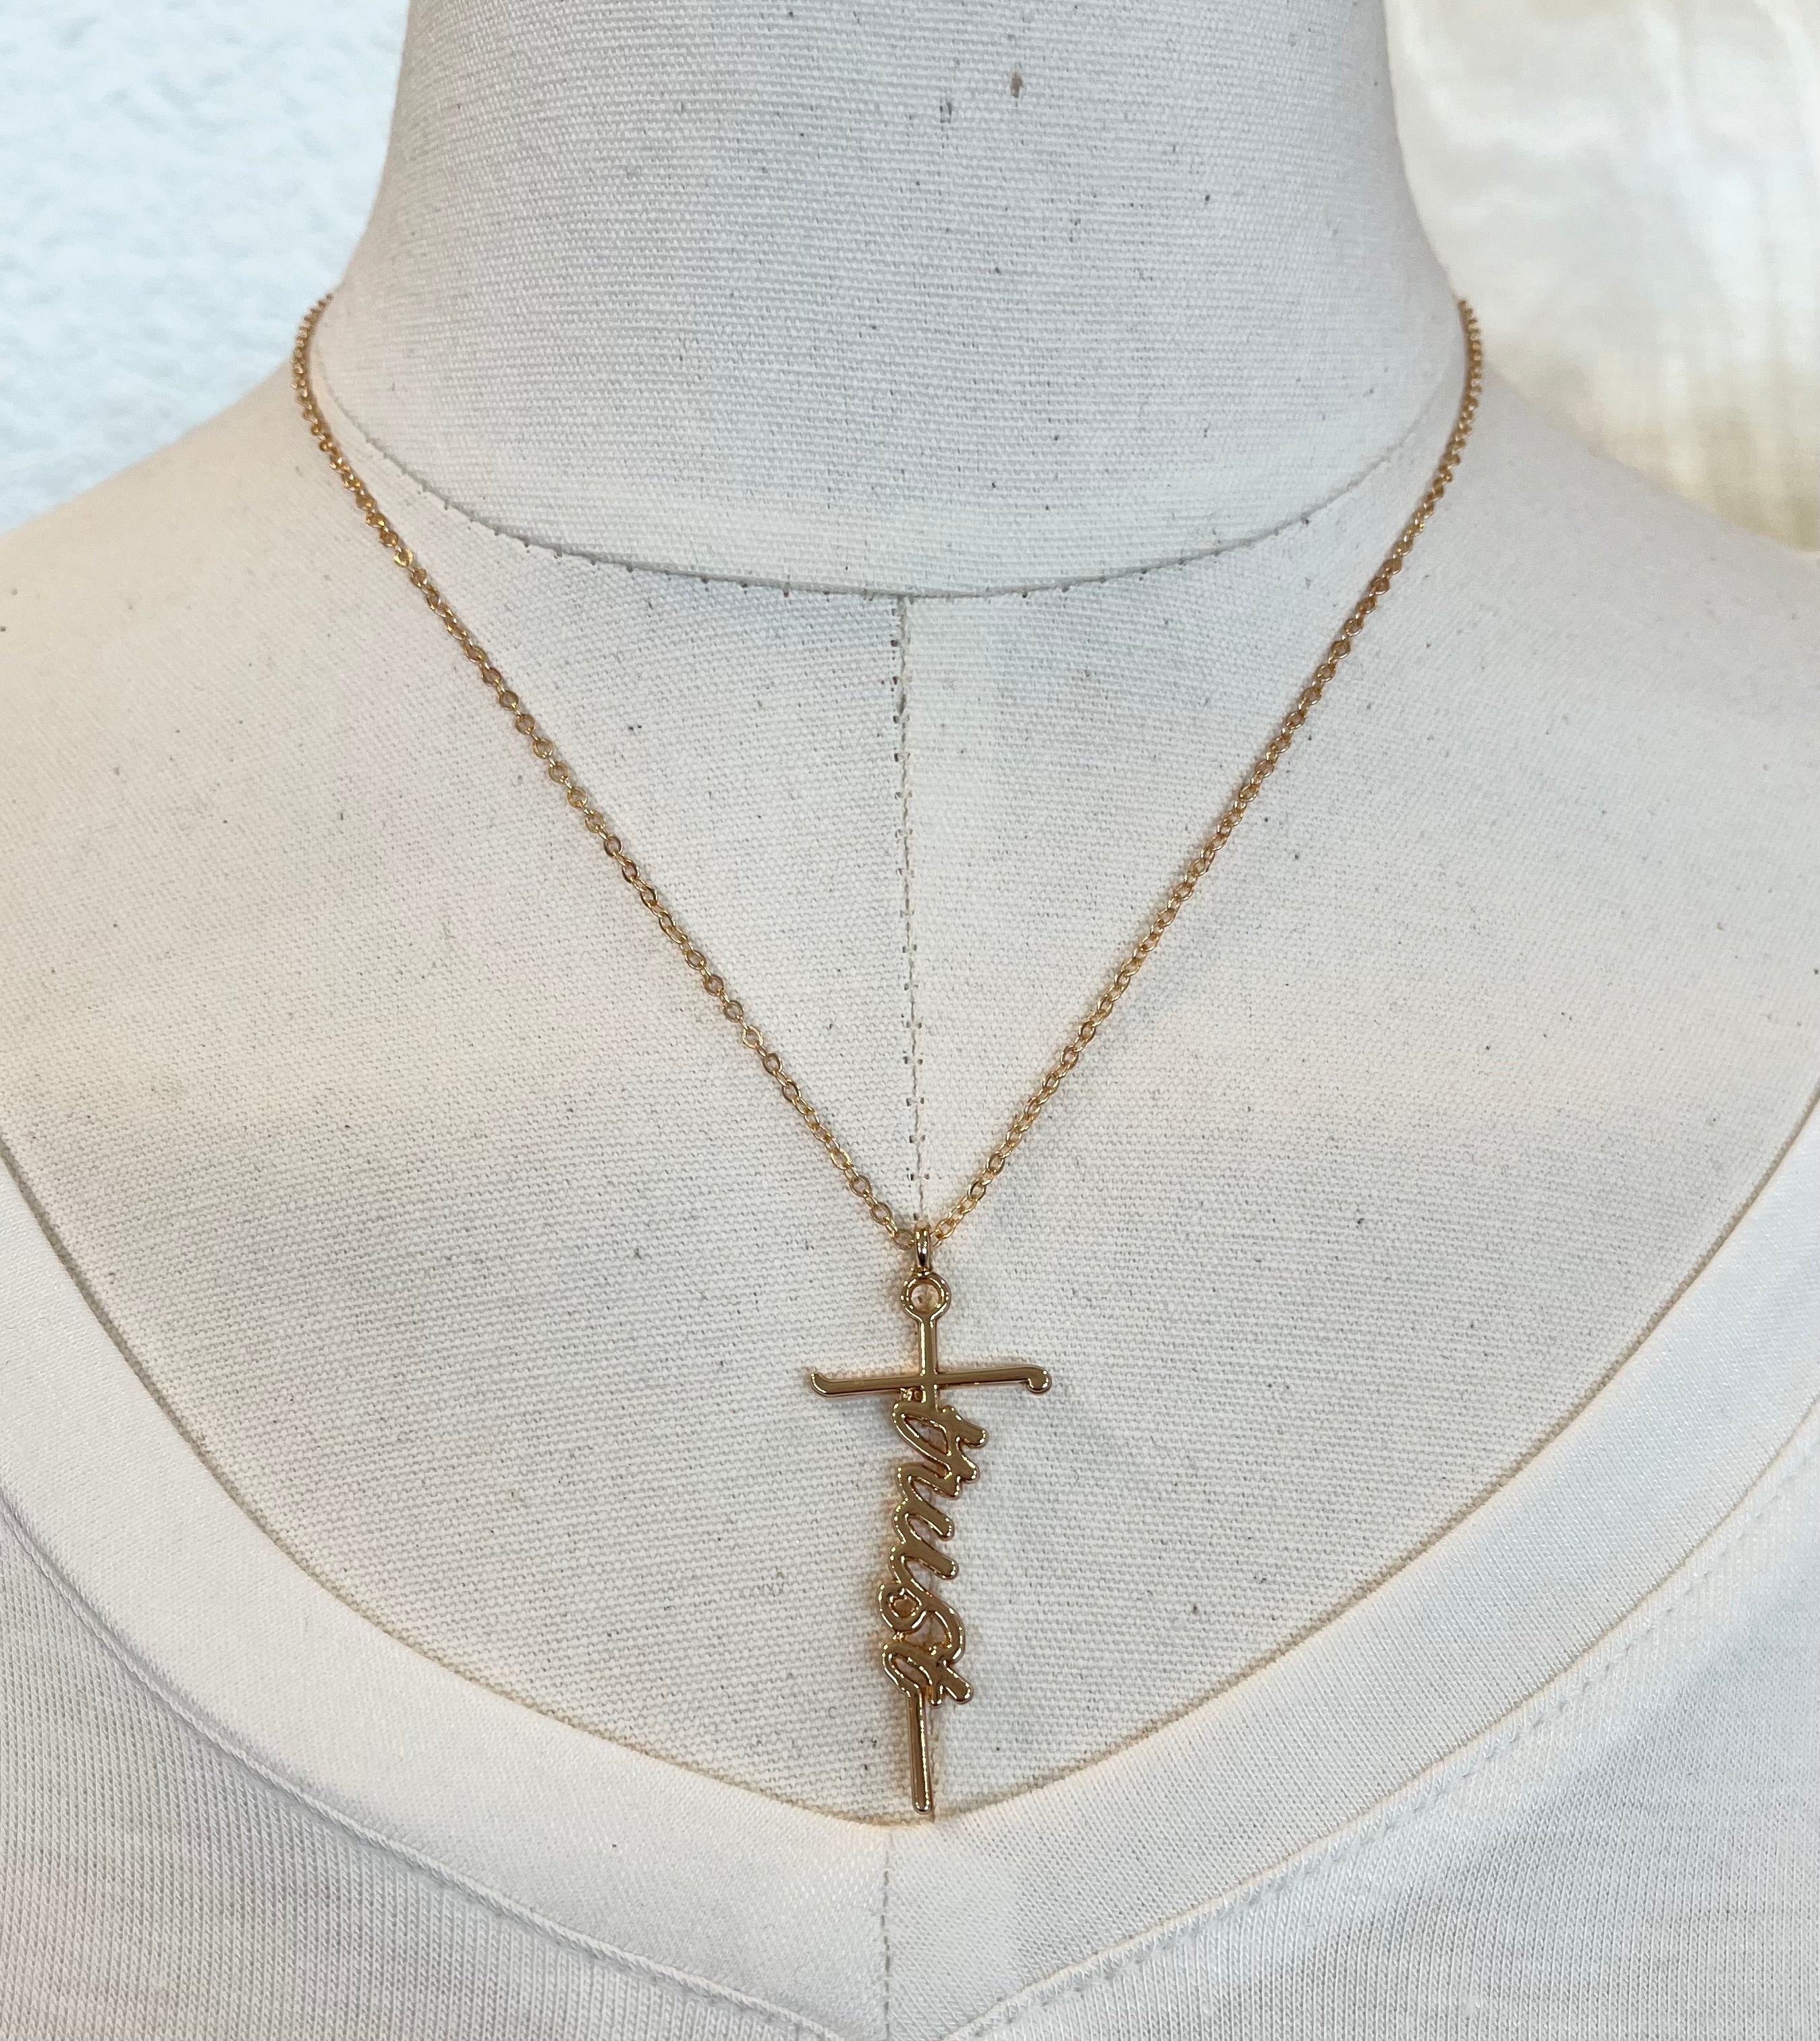 Cross and Words Necklaces- Two Word Choices